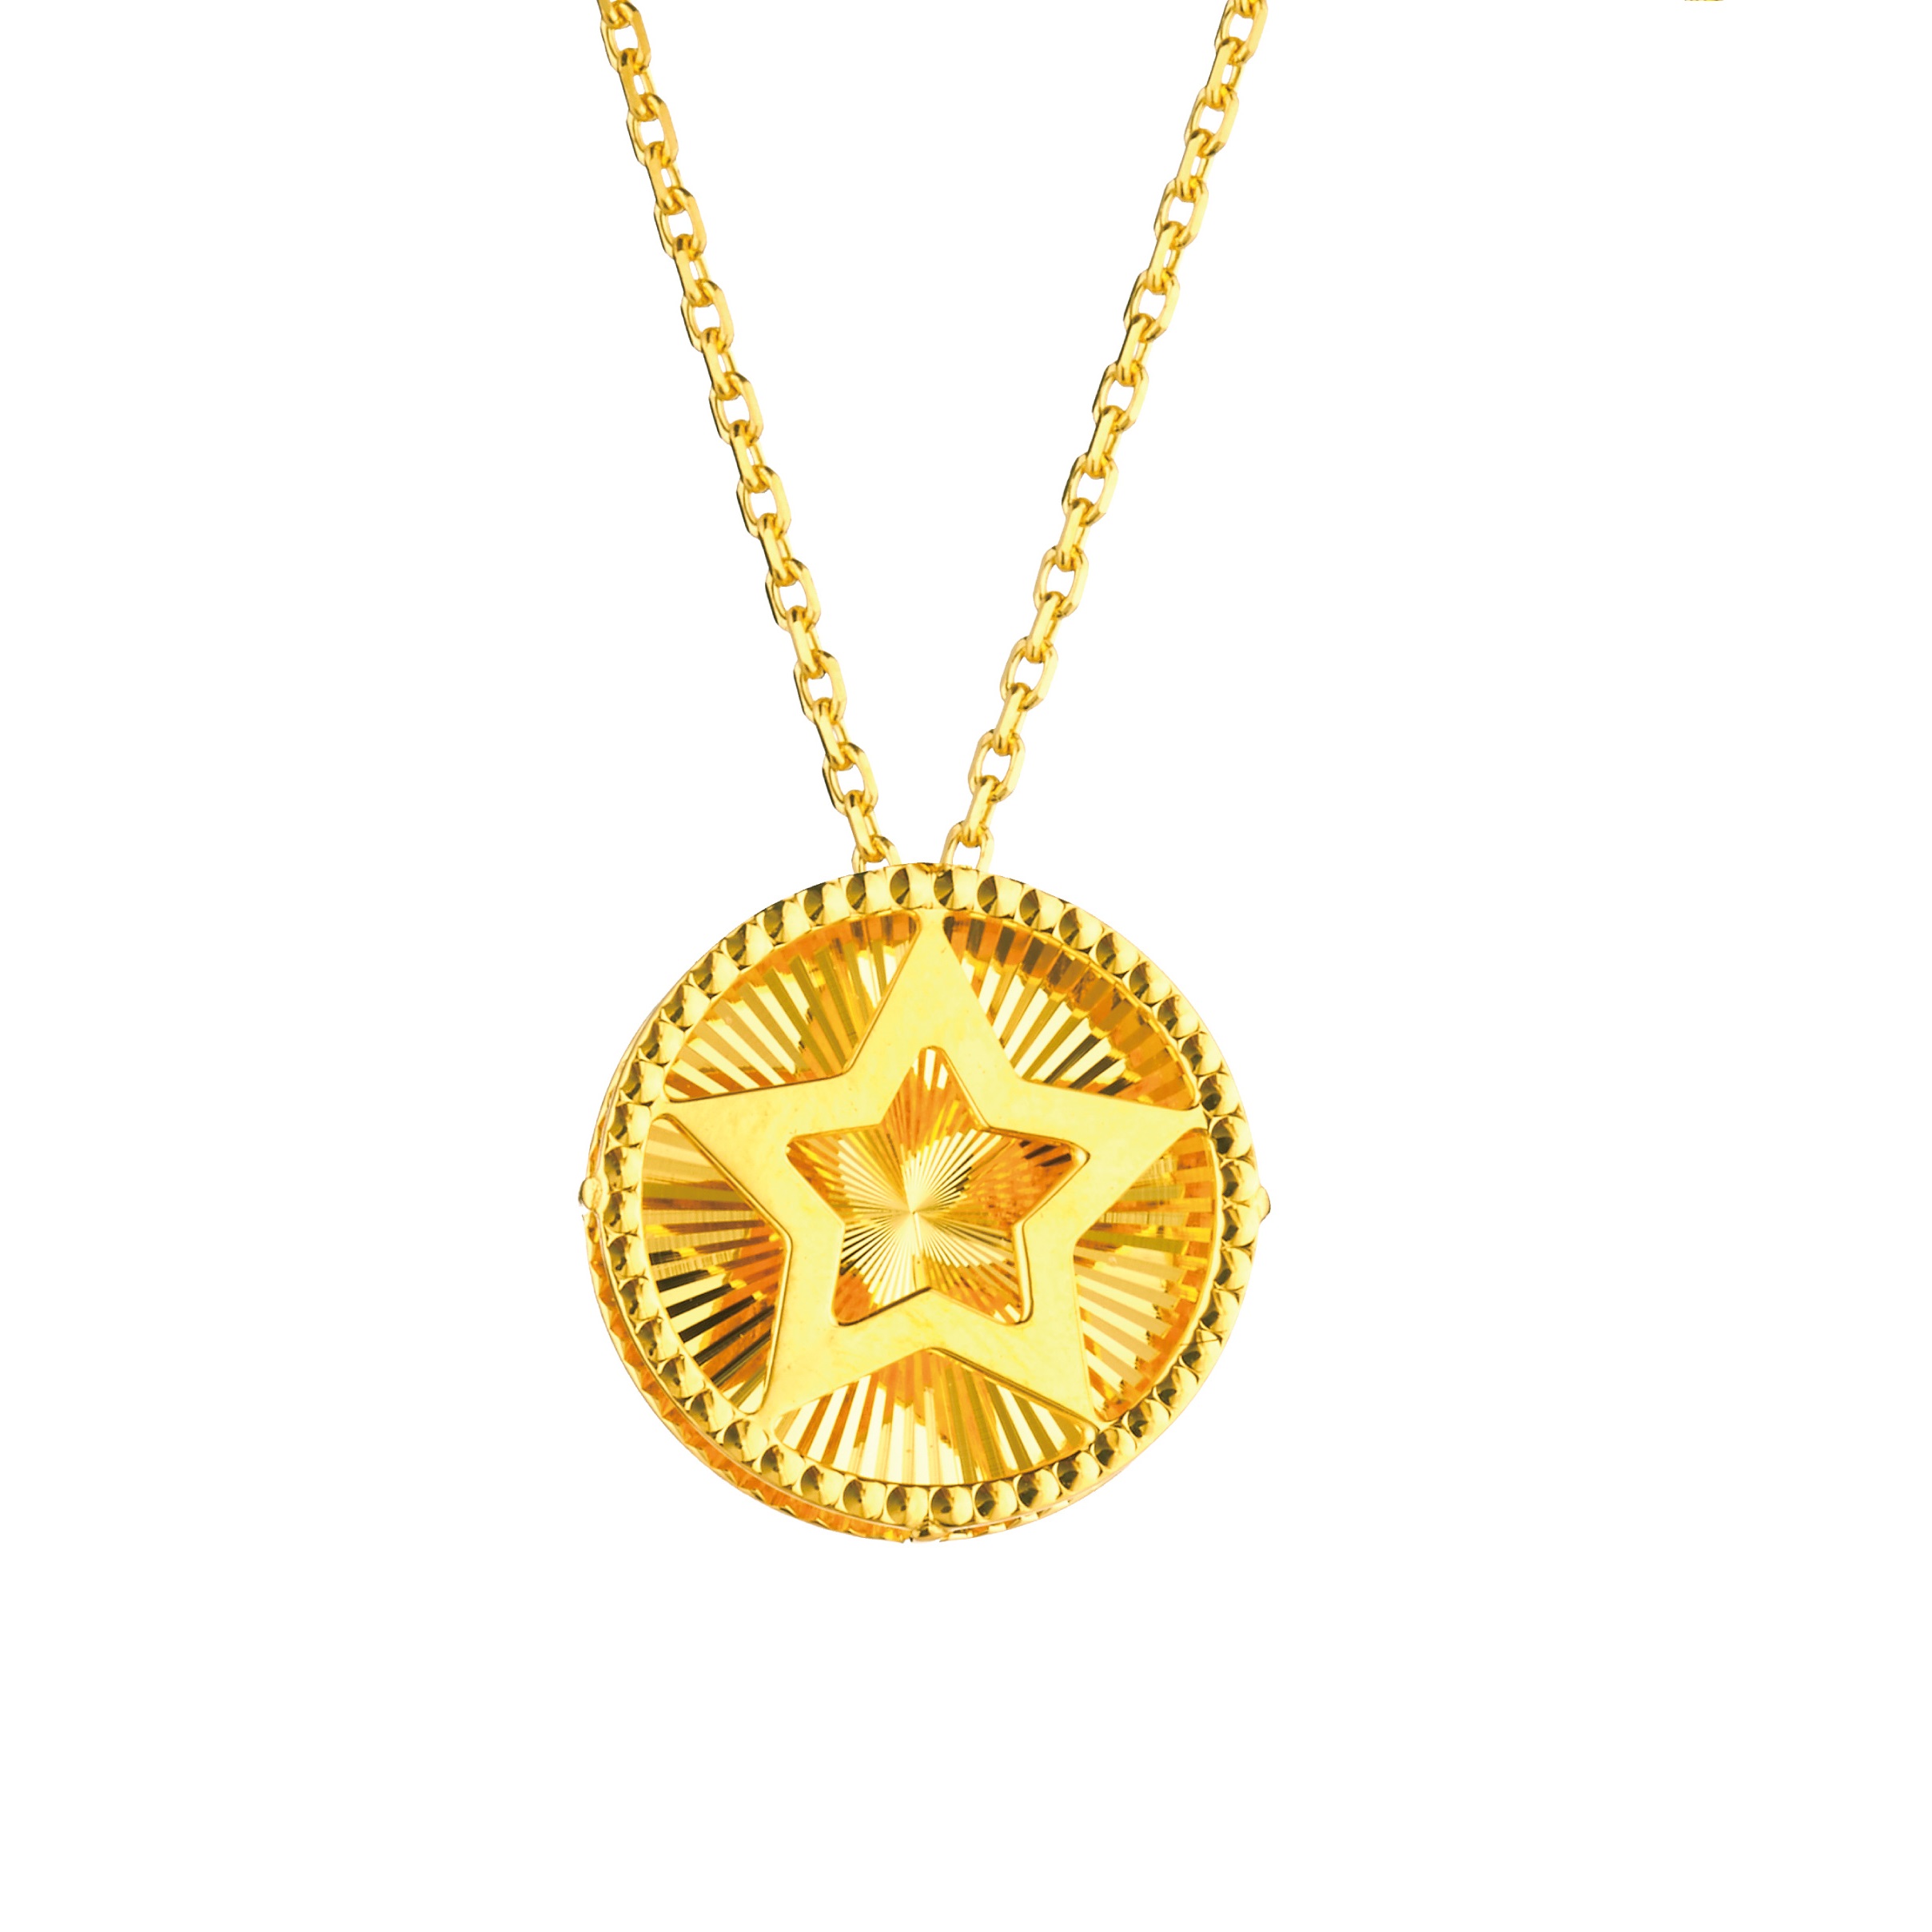 Goldstyle "Companion Star" Gold Necklace